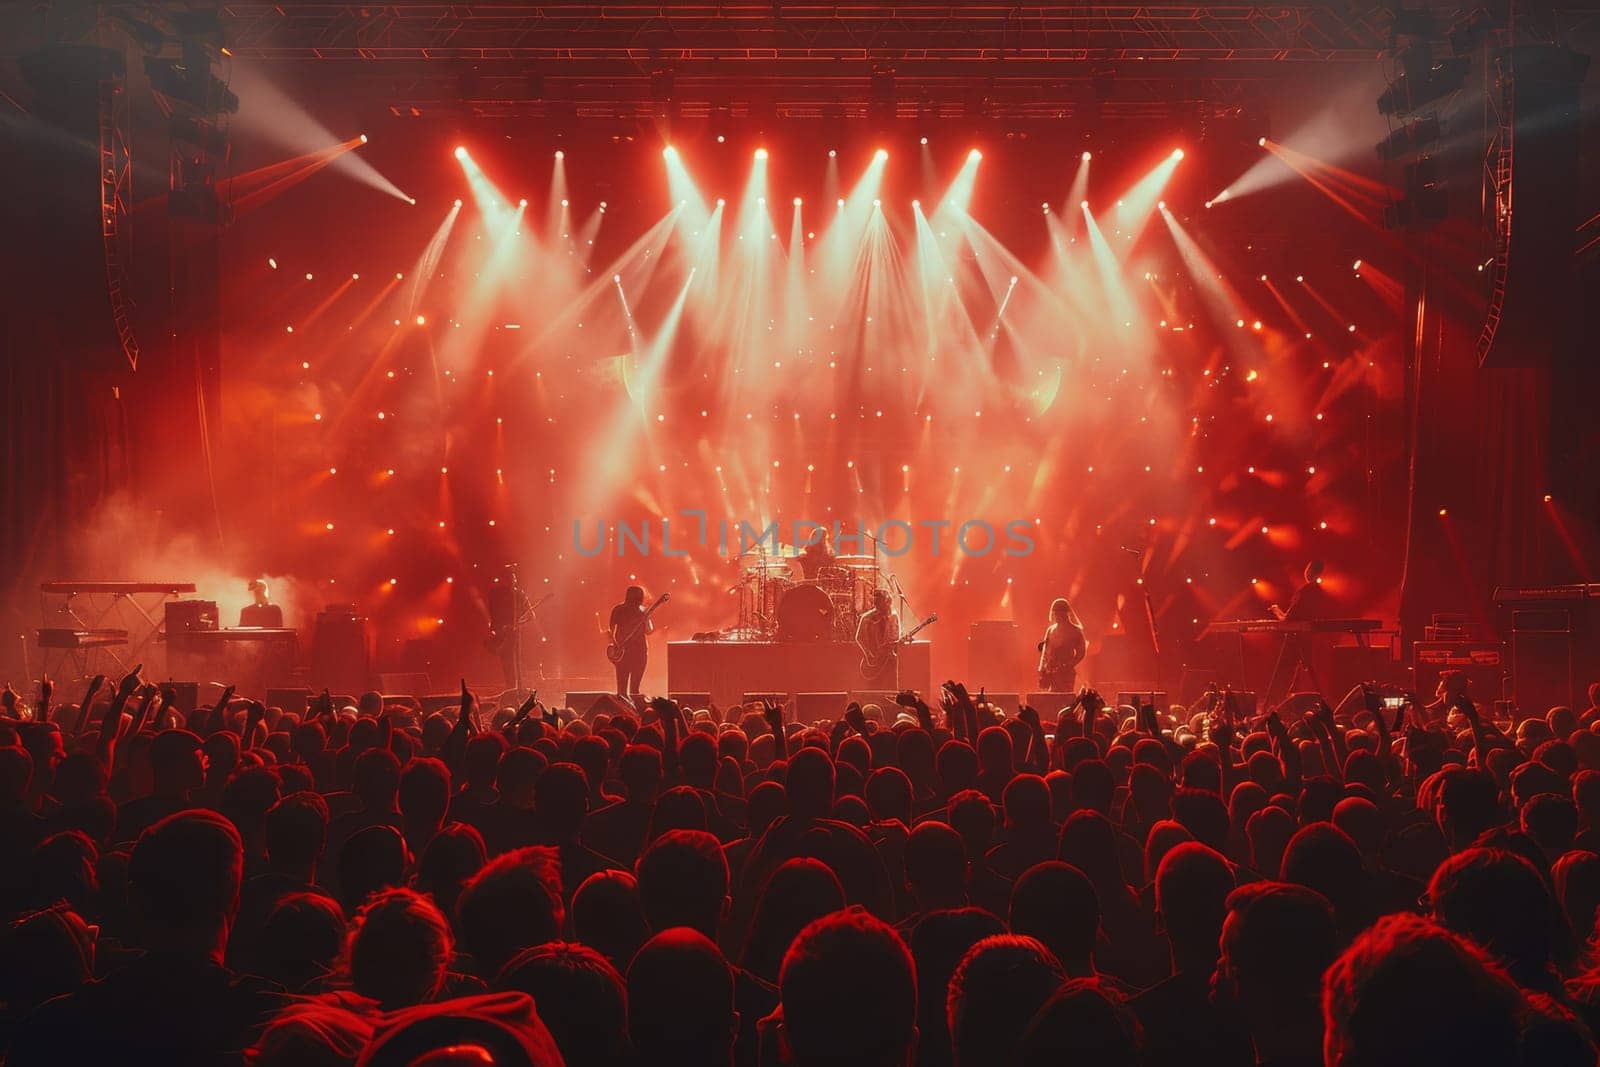 A concert with a large crowd of people and a stage with a band playing. The stage is lit up with bright lights and the audience is cheering